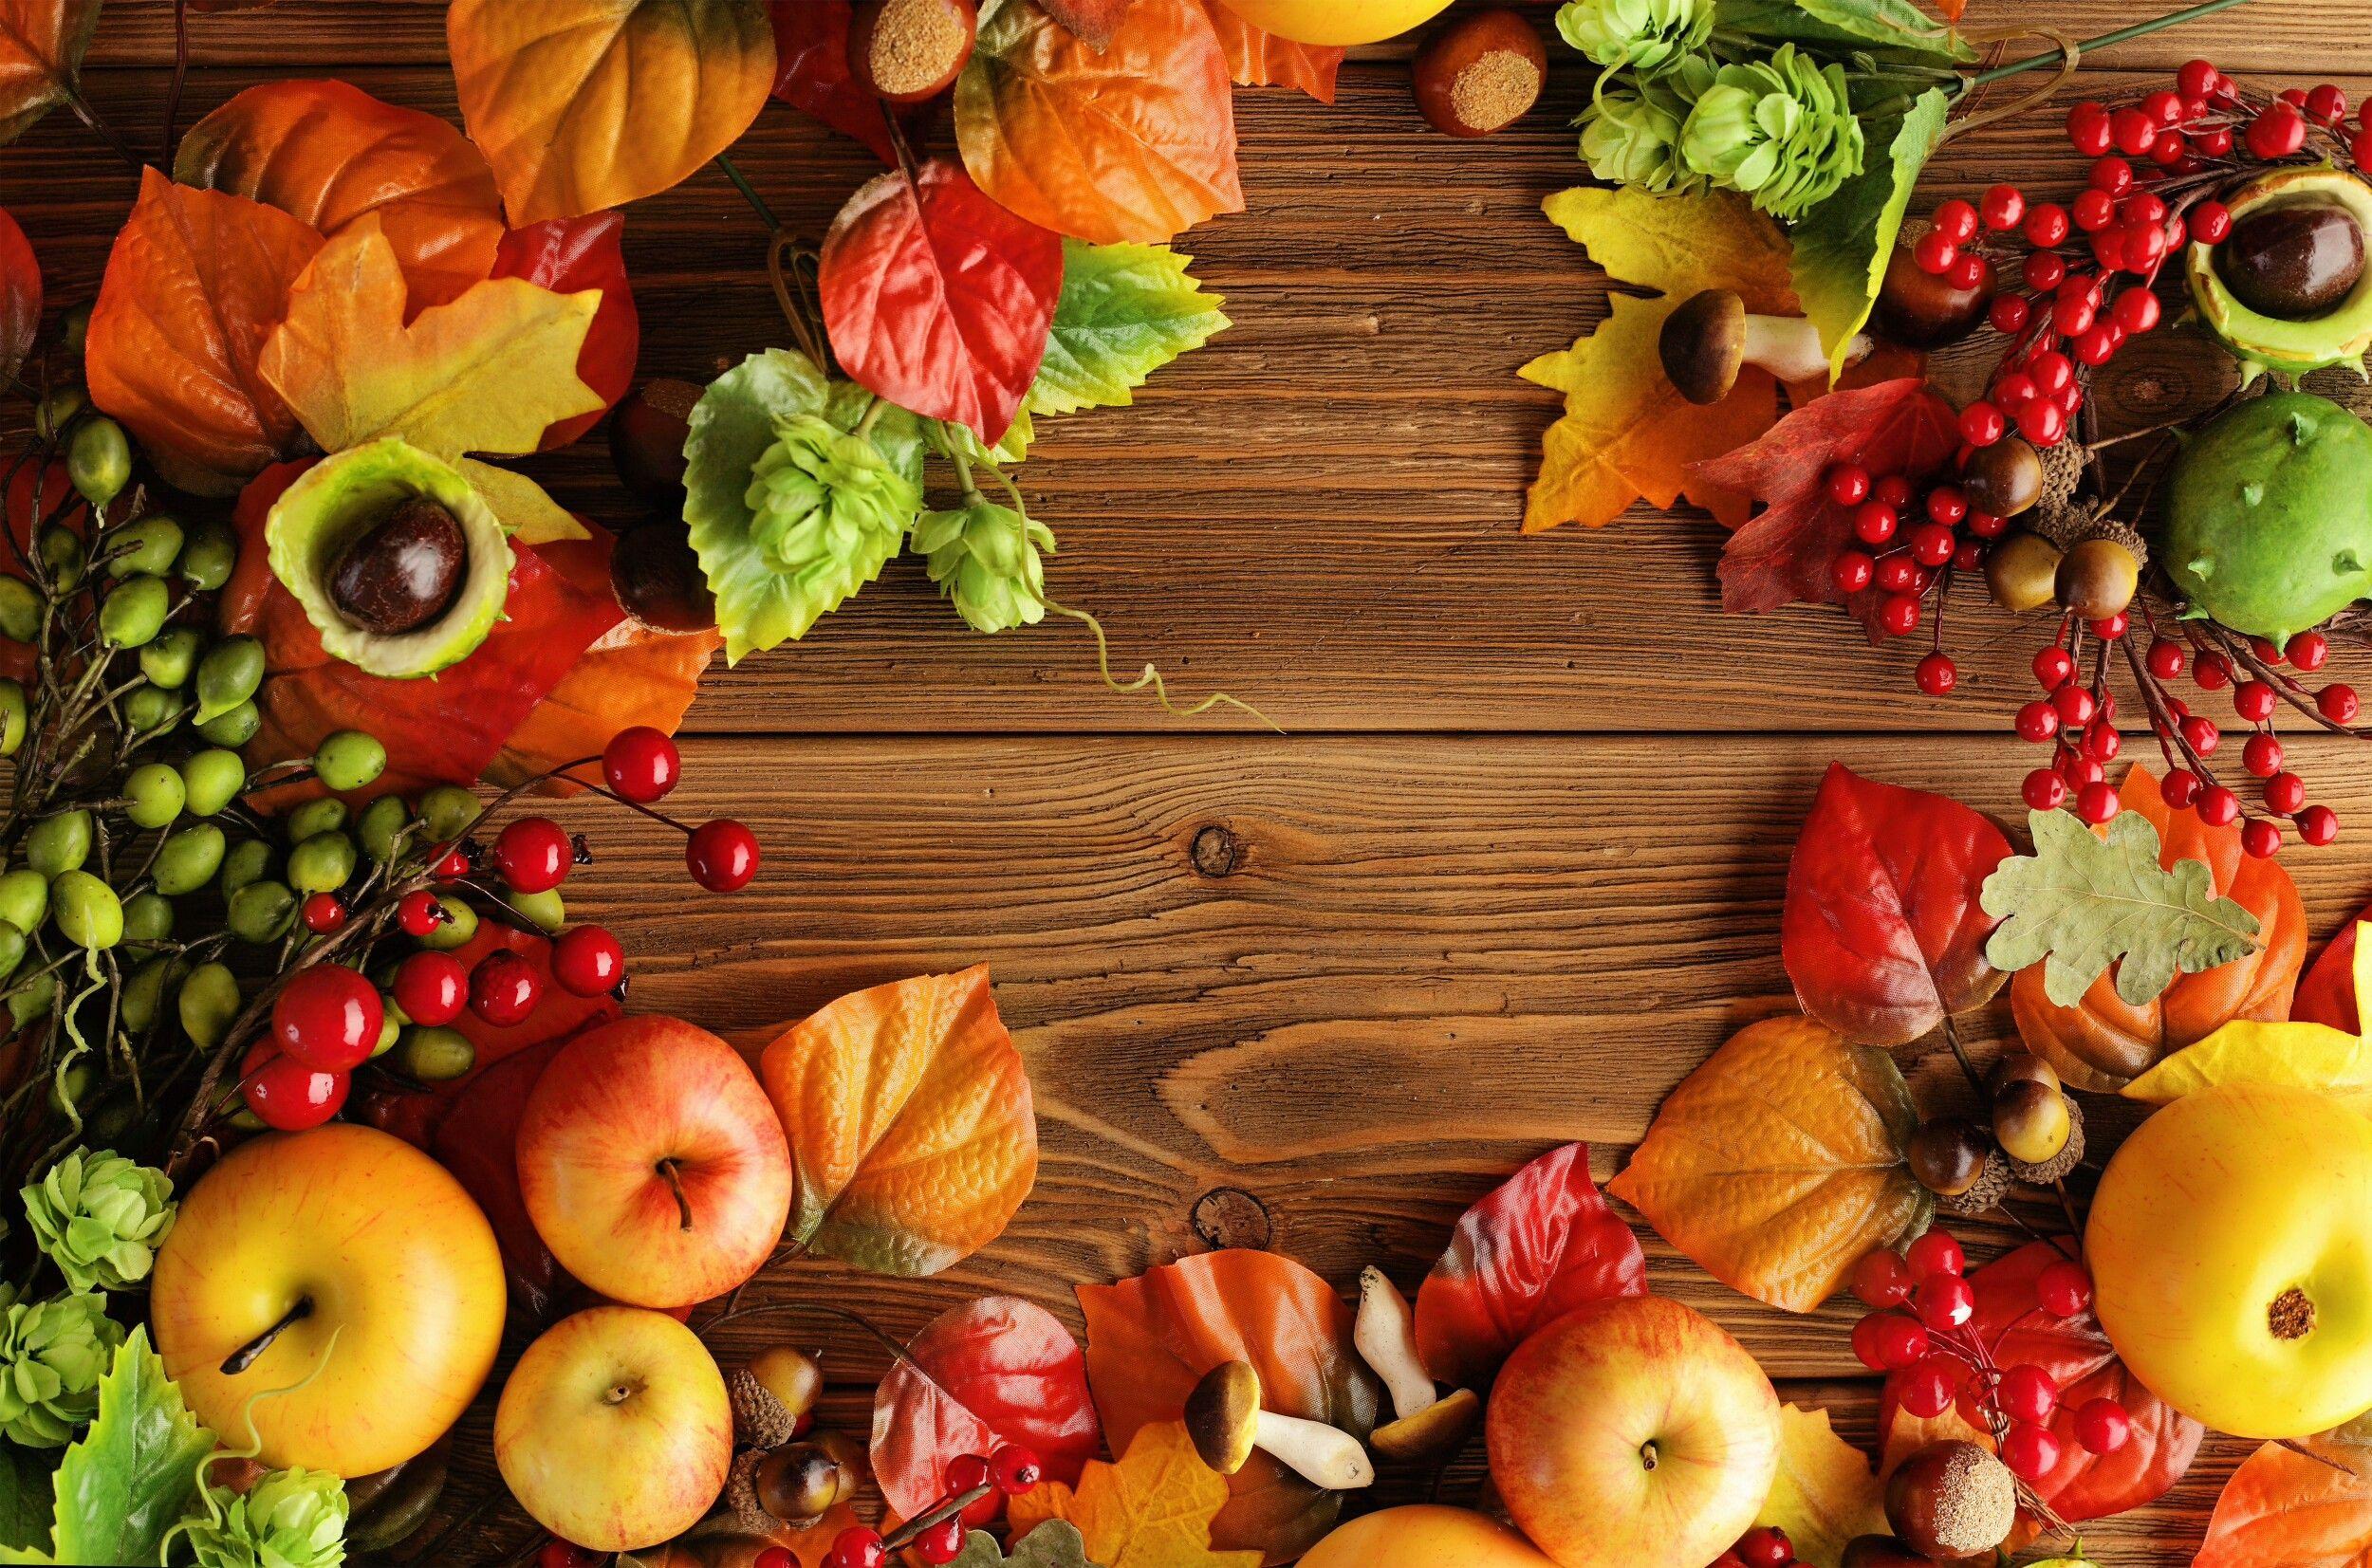 Autumn Wooden Background Fruits HD Wallpaper. Autumn leaves